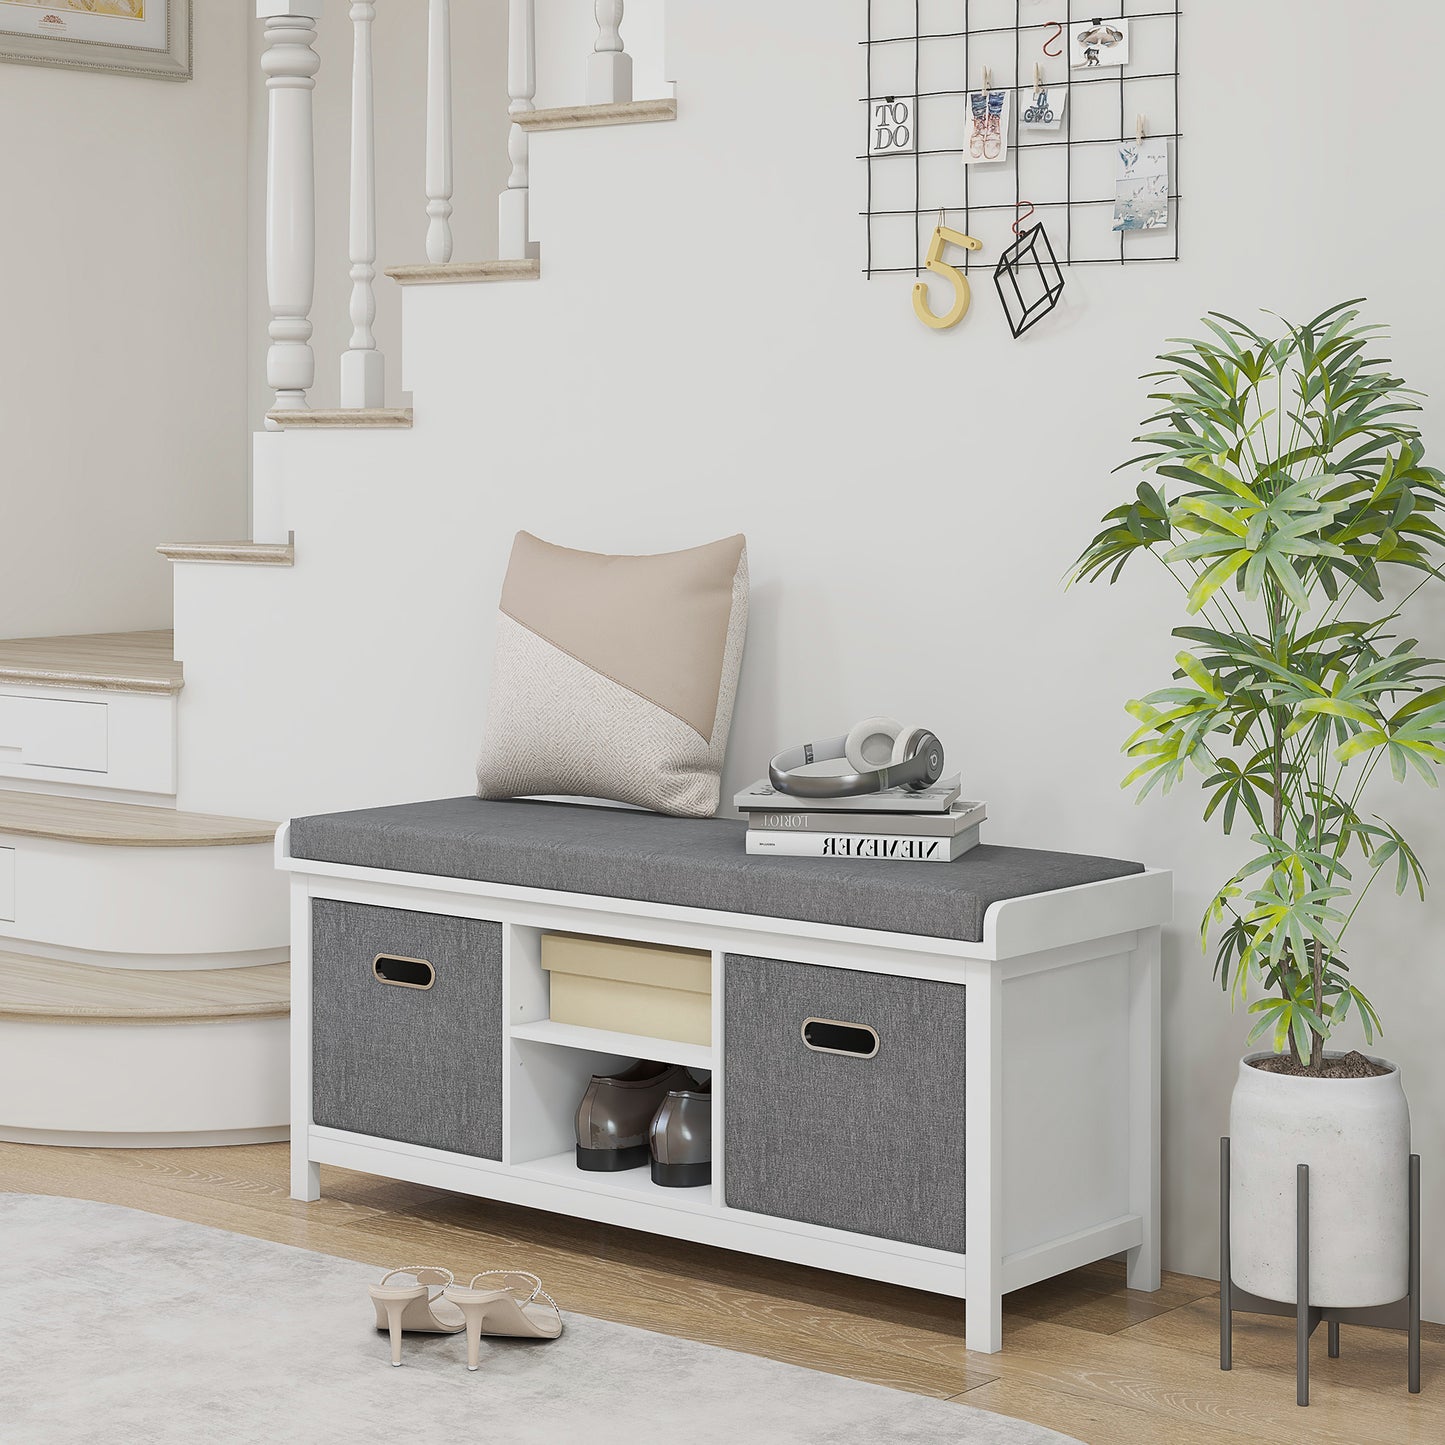 HOMCOM Shoe Bench with 2 Drawers and Cushion - White